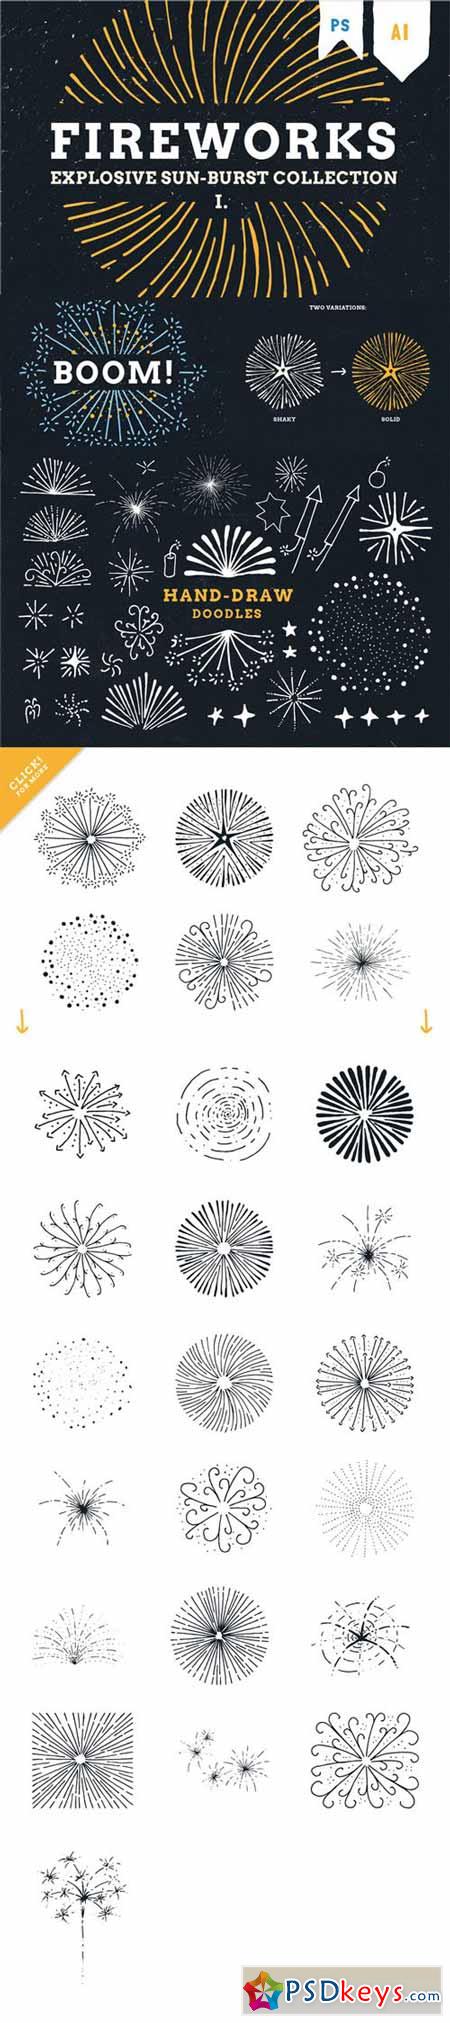 Fireworks - hand draw explosion pack 108191